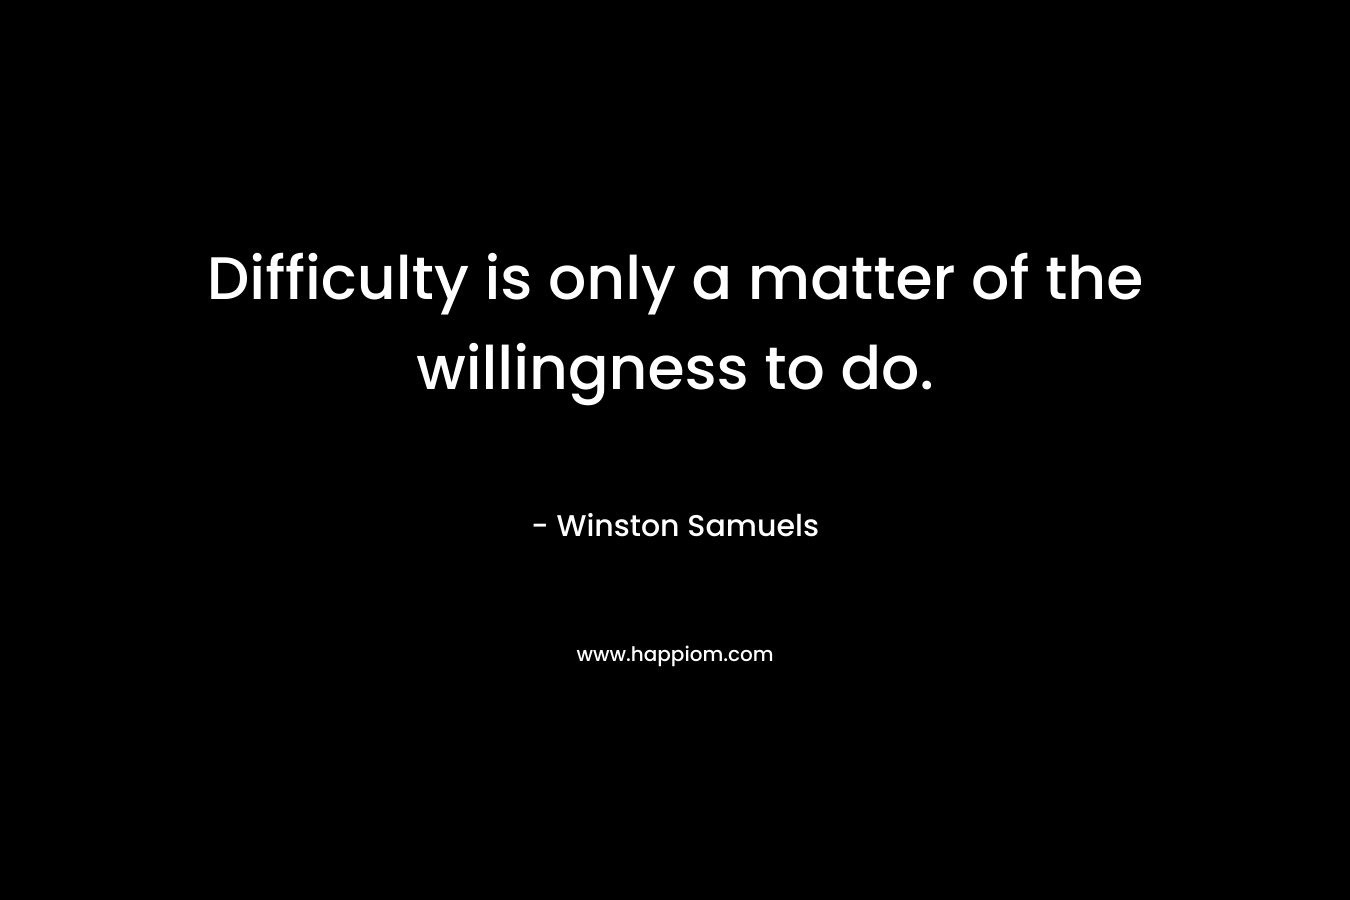 Difficulty is only a matter of the willingness to do.